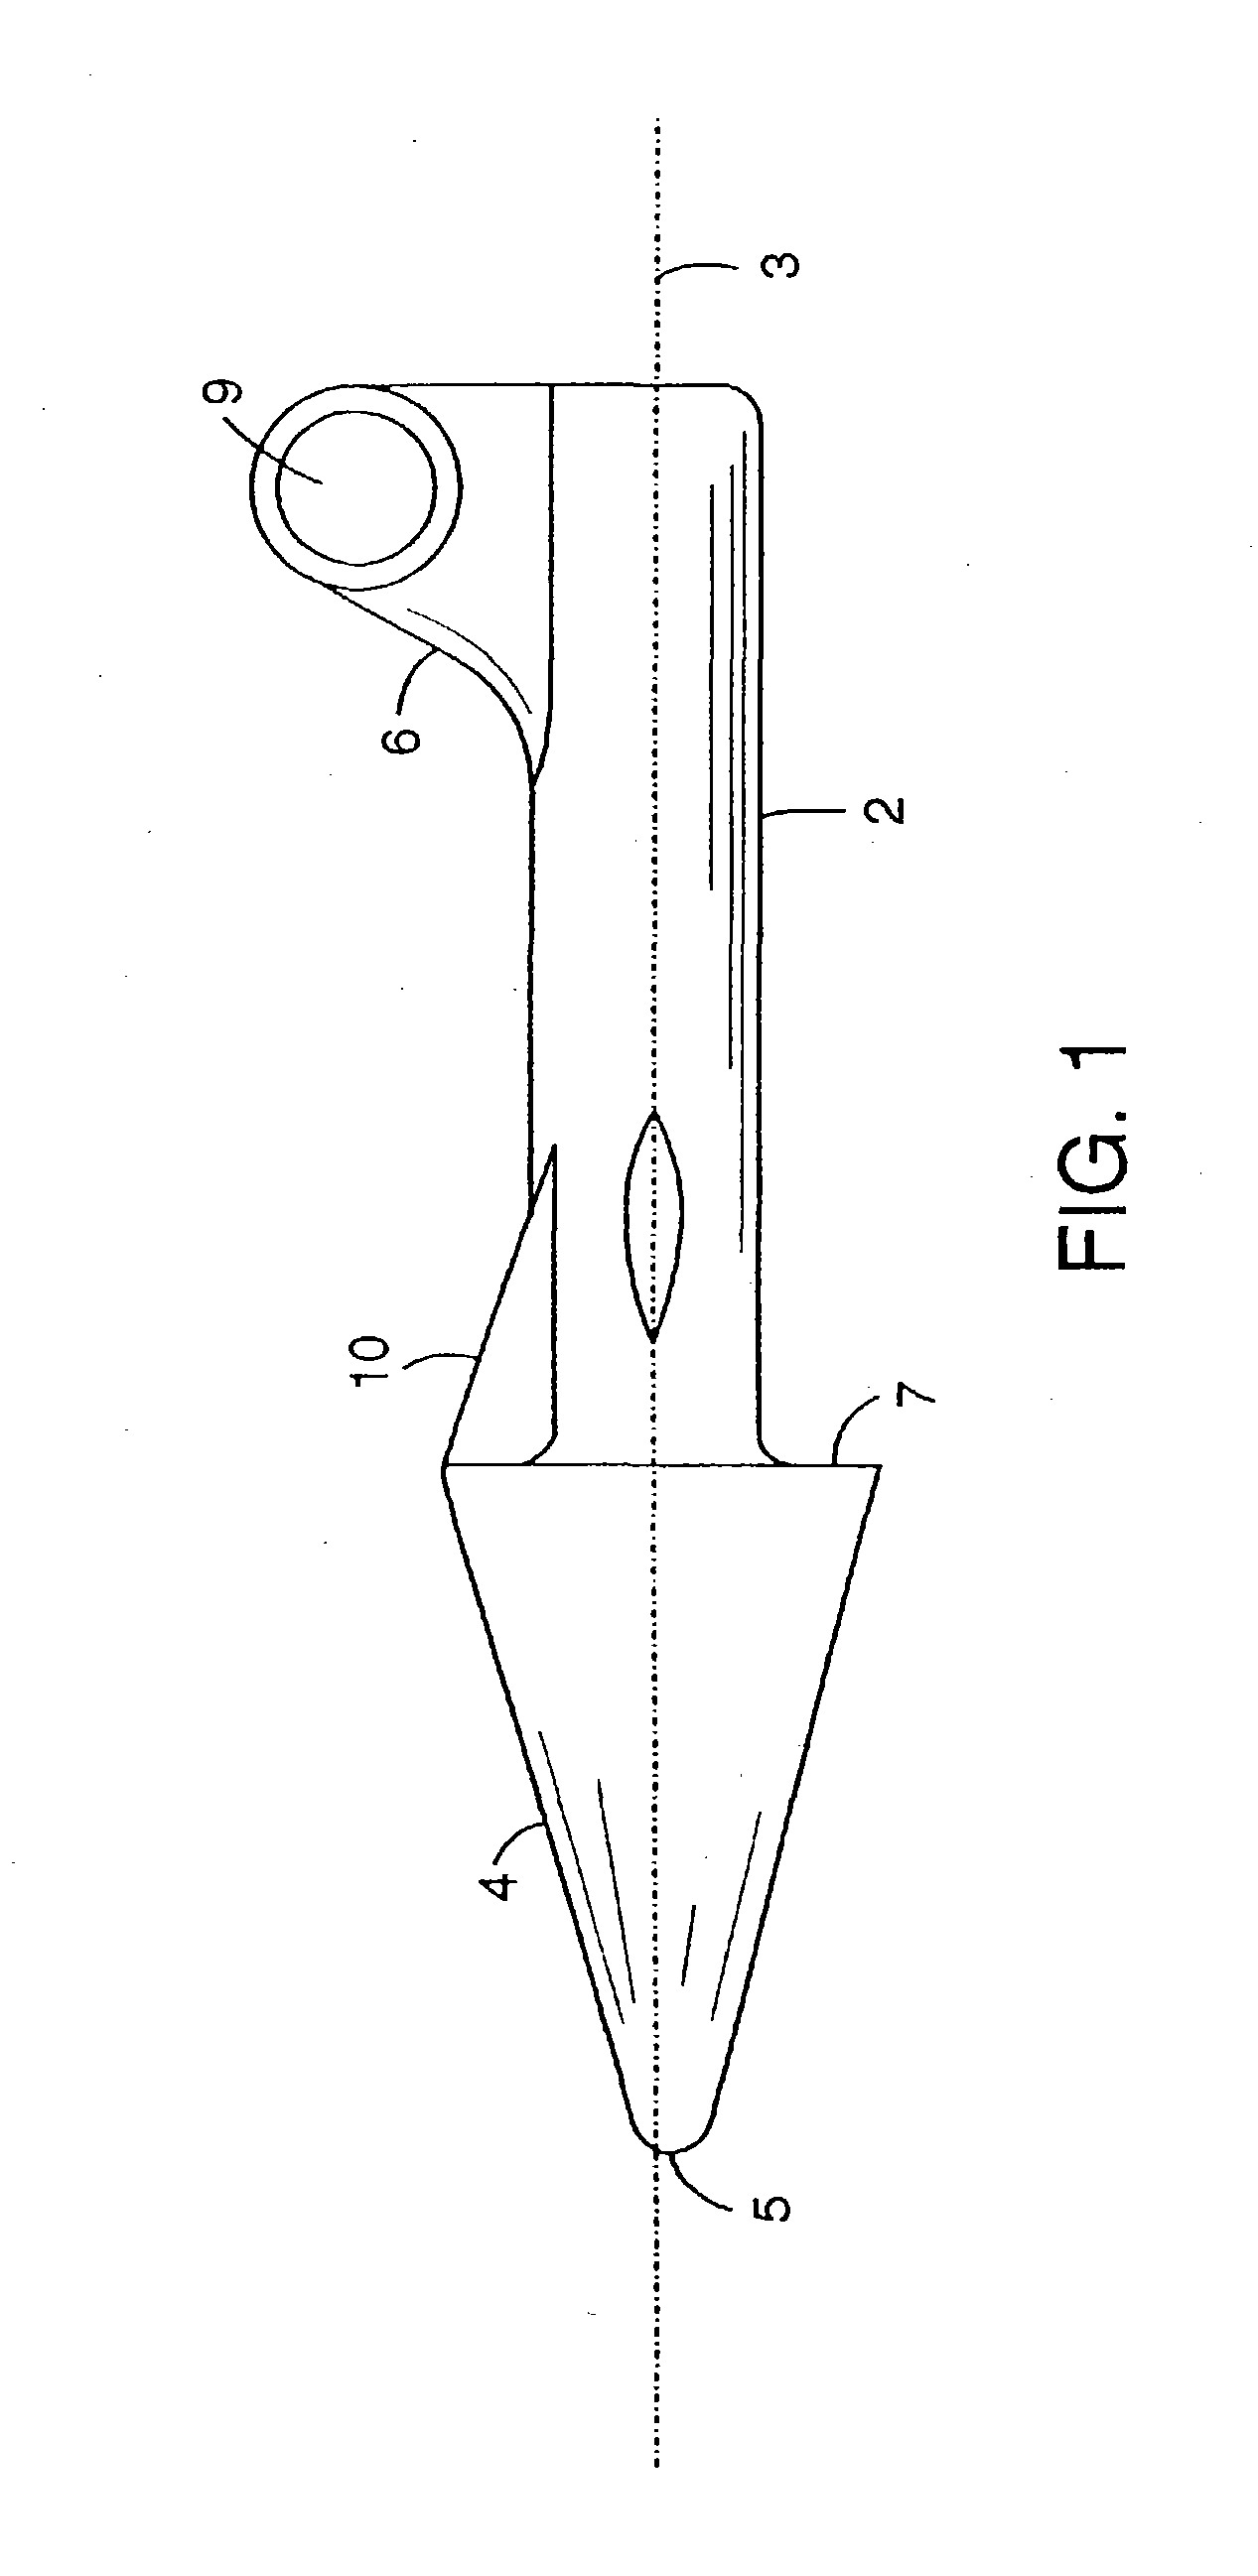 Tissue and membrane fixation apparatus and methods for use thereof